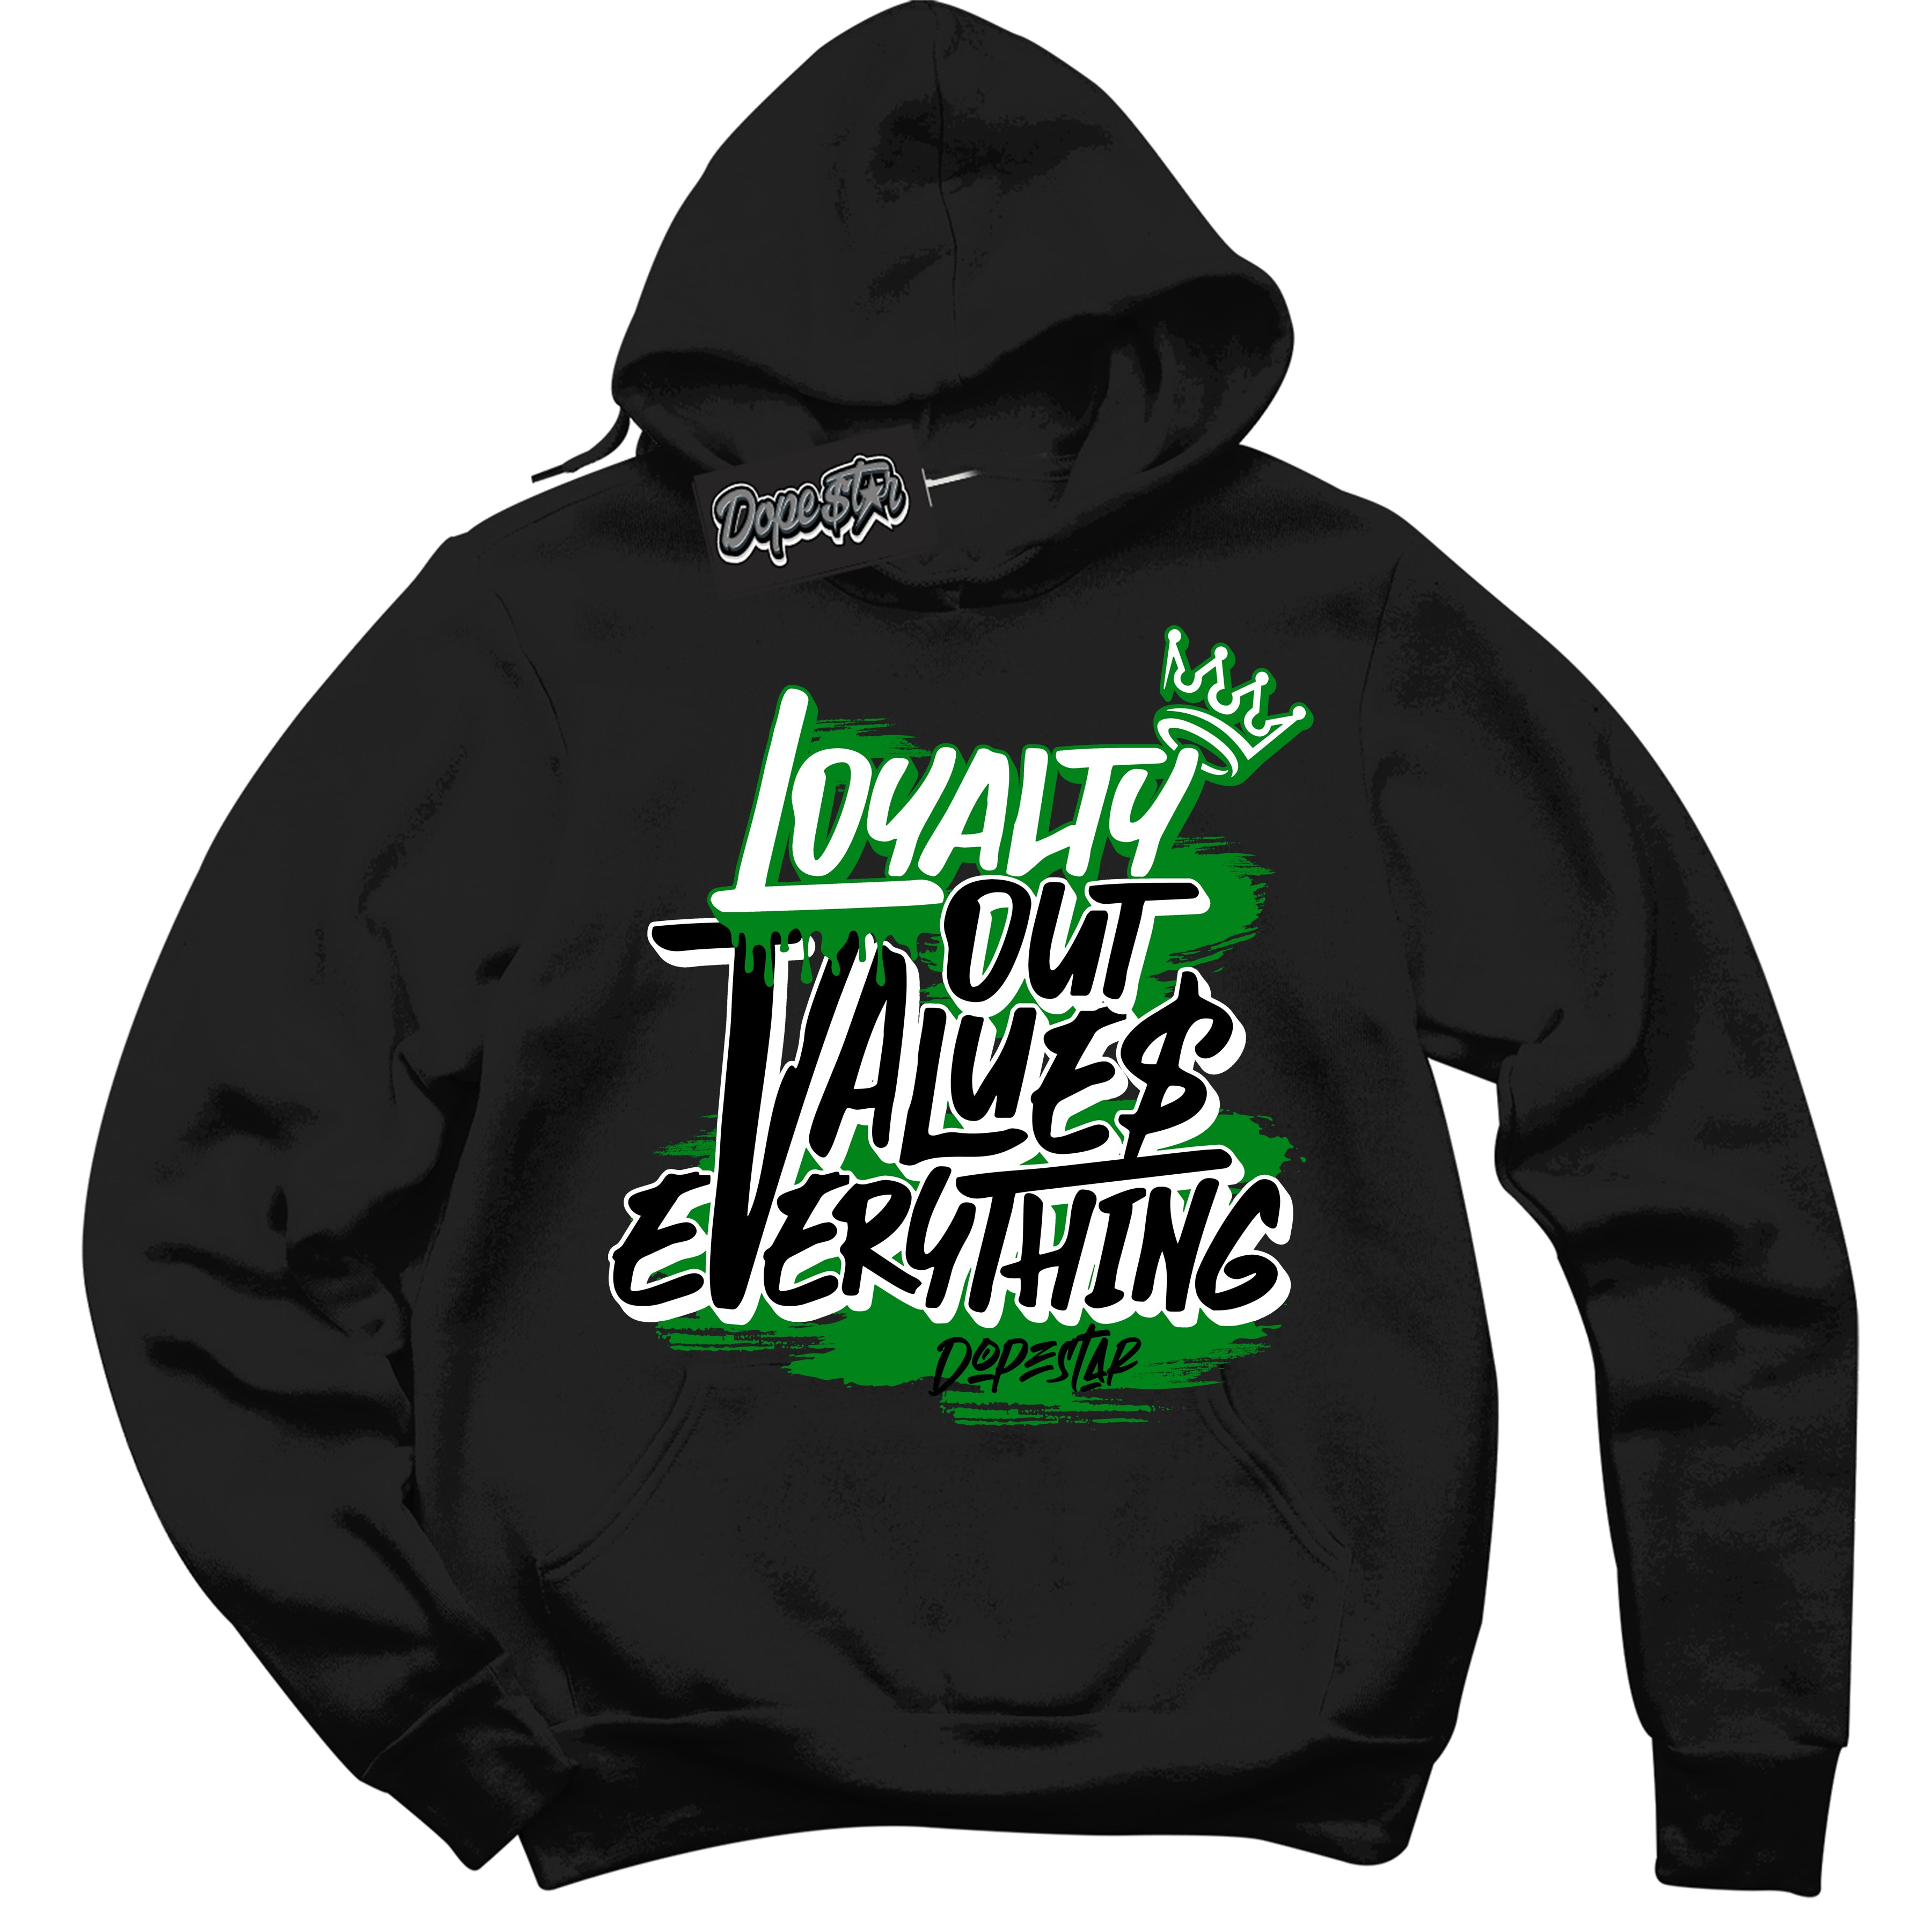 Cool Black Hoodie with “ Loyalty Out Values Everything ”  design that Perfectly Matches  Lucky Green 1s Sneakers.